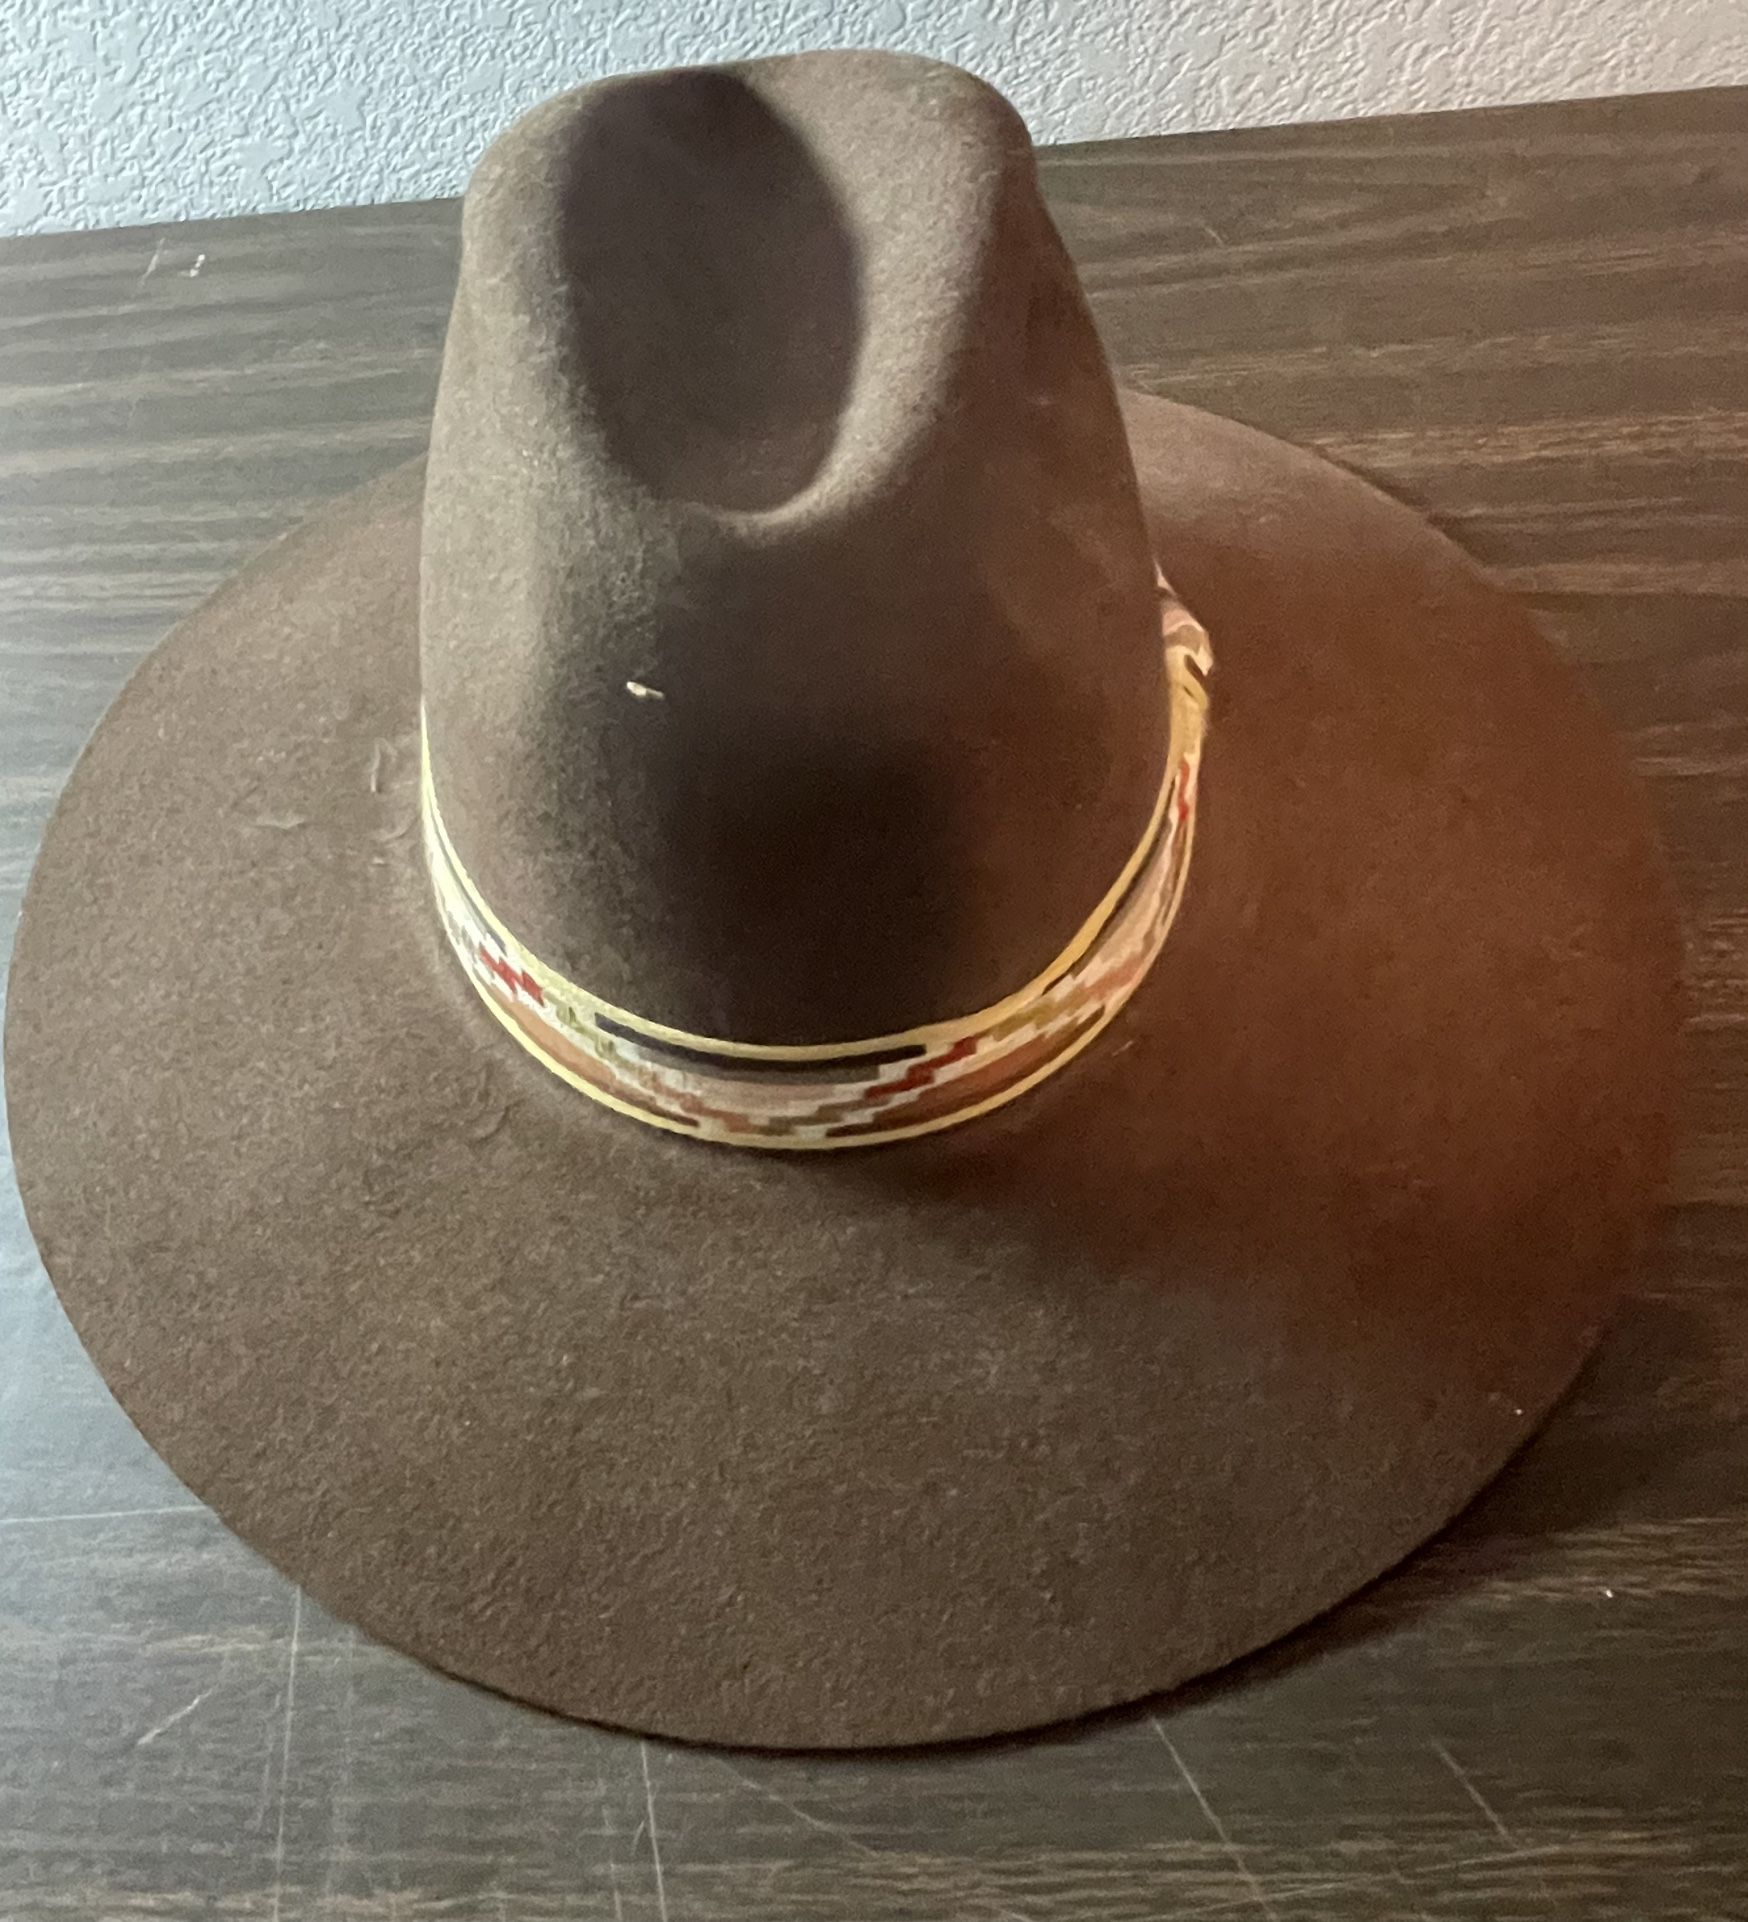 Frontier Line American Hat CO. Houston Texas Vintage Cowboy Western Style Hat 7